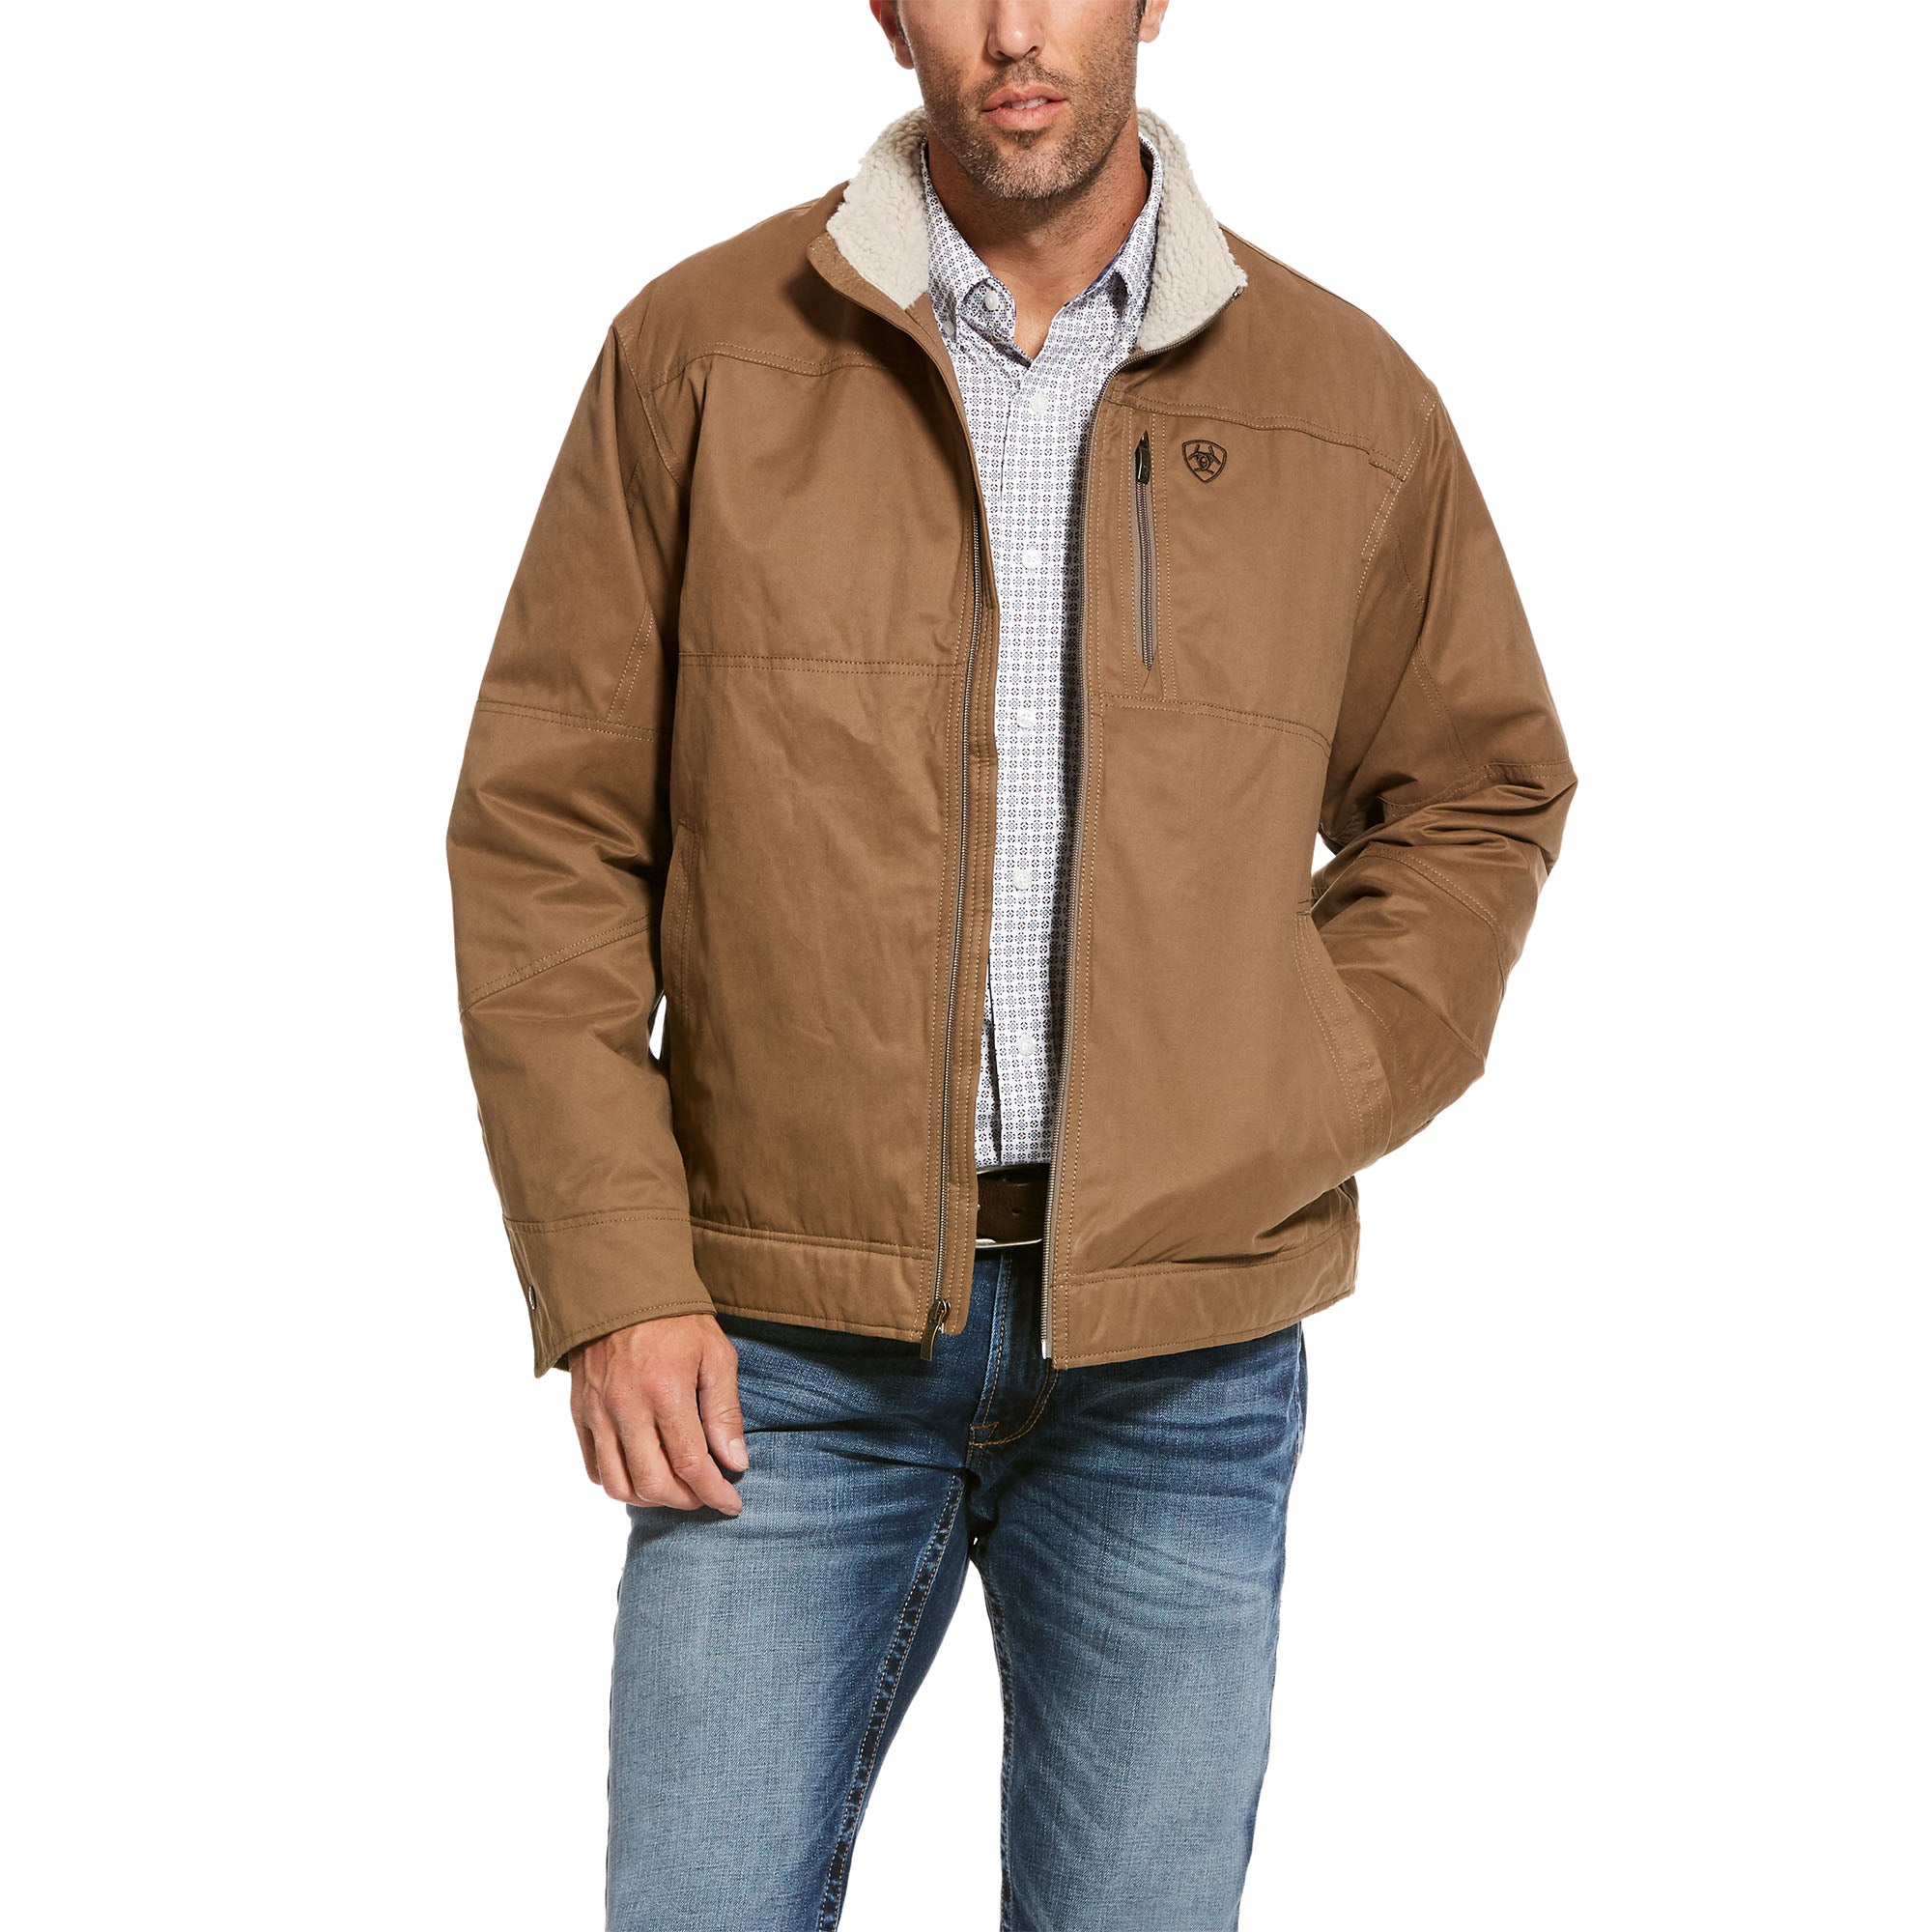 Ariat Grizzly Canvas Jacket